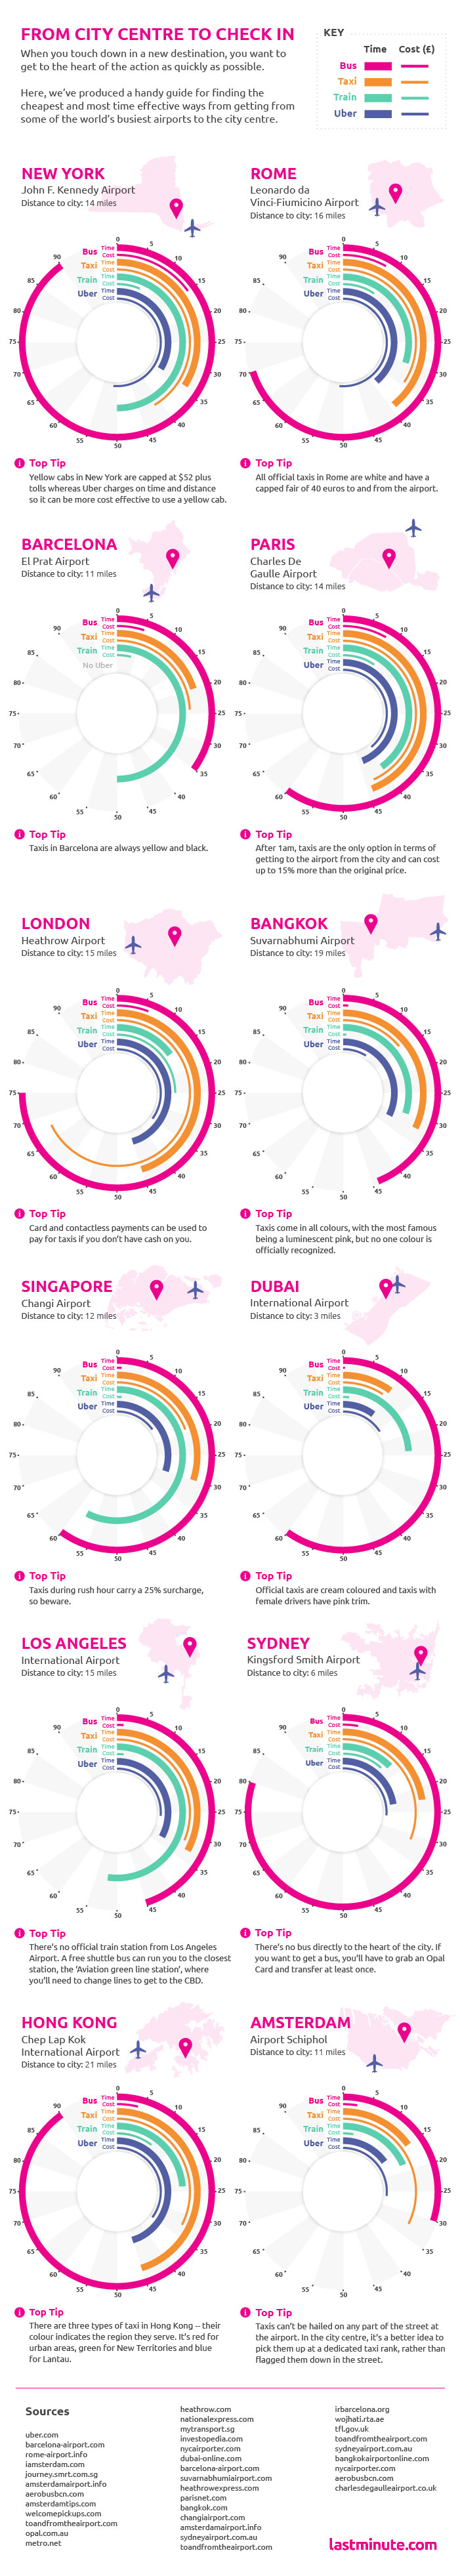 From Airport to City Center: Timelines - Infographic